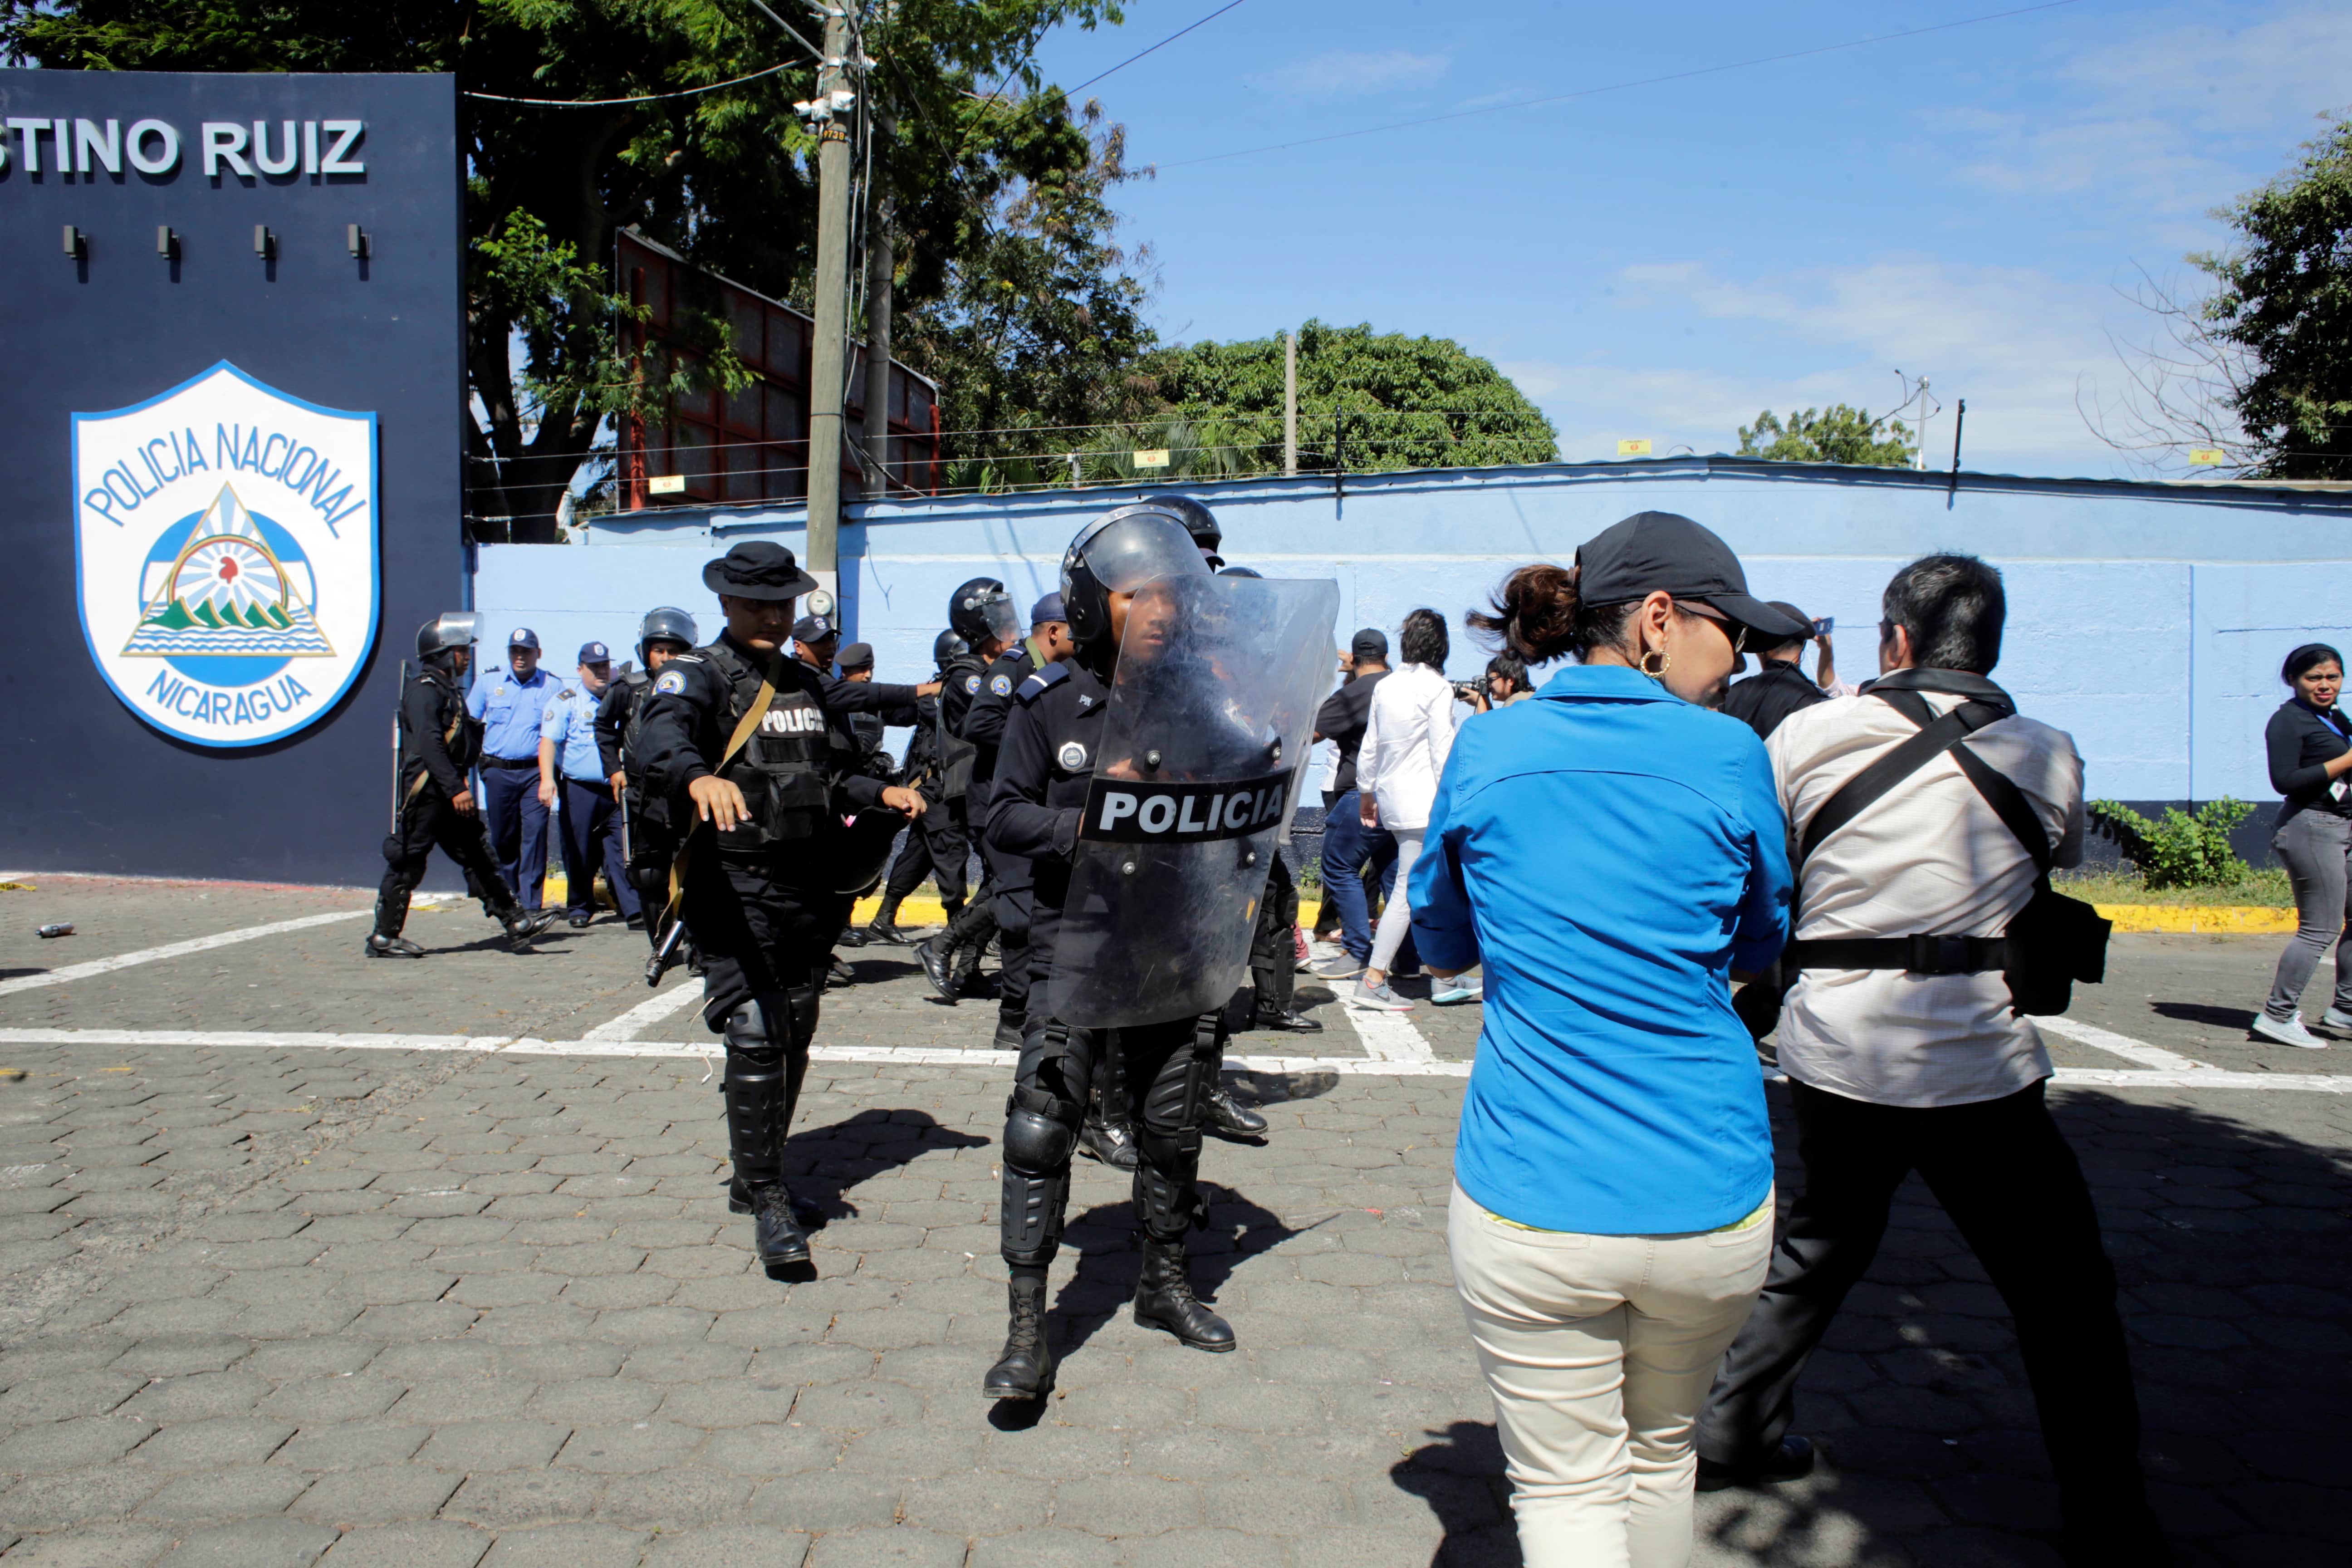 Riot police dislodge journalists from the main entrance of police headquarters in Managua, Nicaragua December 15, 2018, REUTERS/Oswaldo Rivas